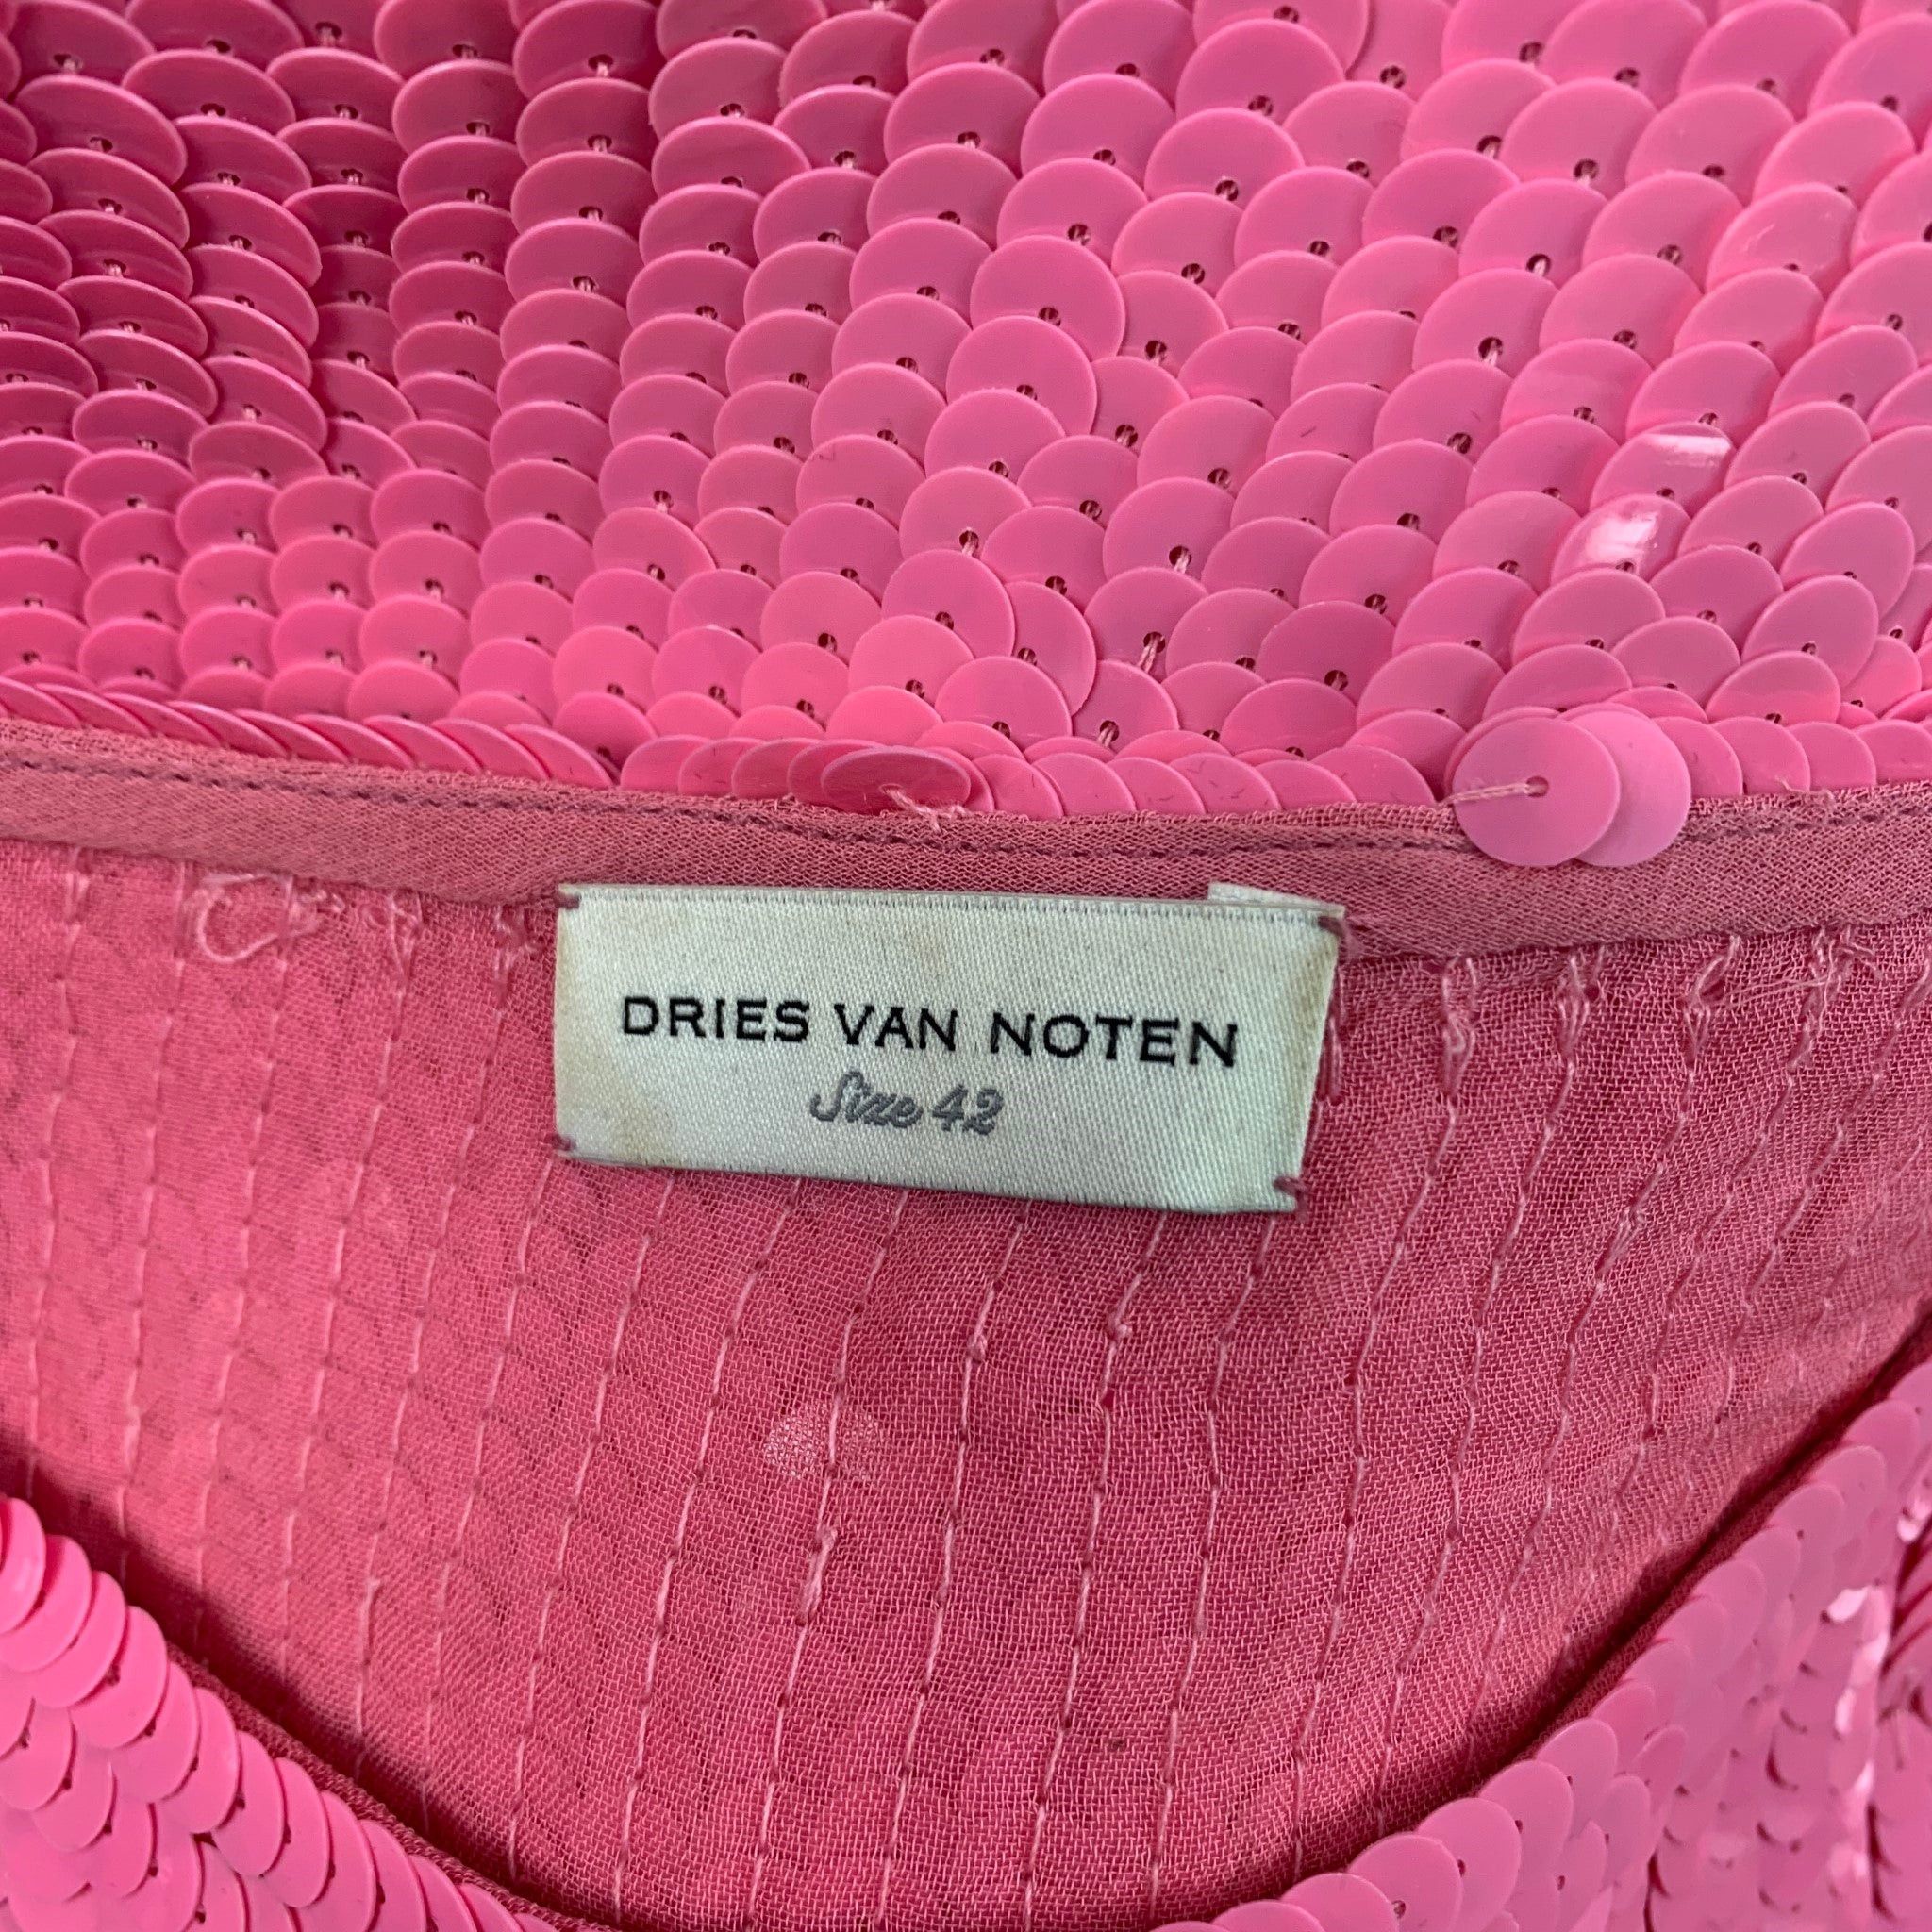 Dries Van Noten FW 21 Pink Viscose Sequined Sleeveless Dress Top Size L / US 10 / IT 46 - 5 Preview